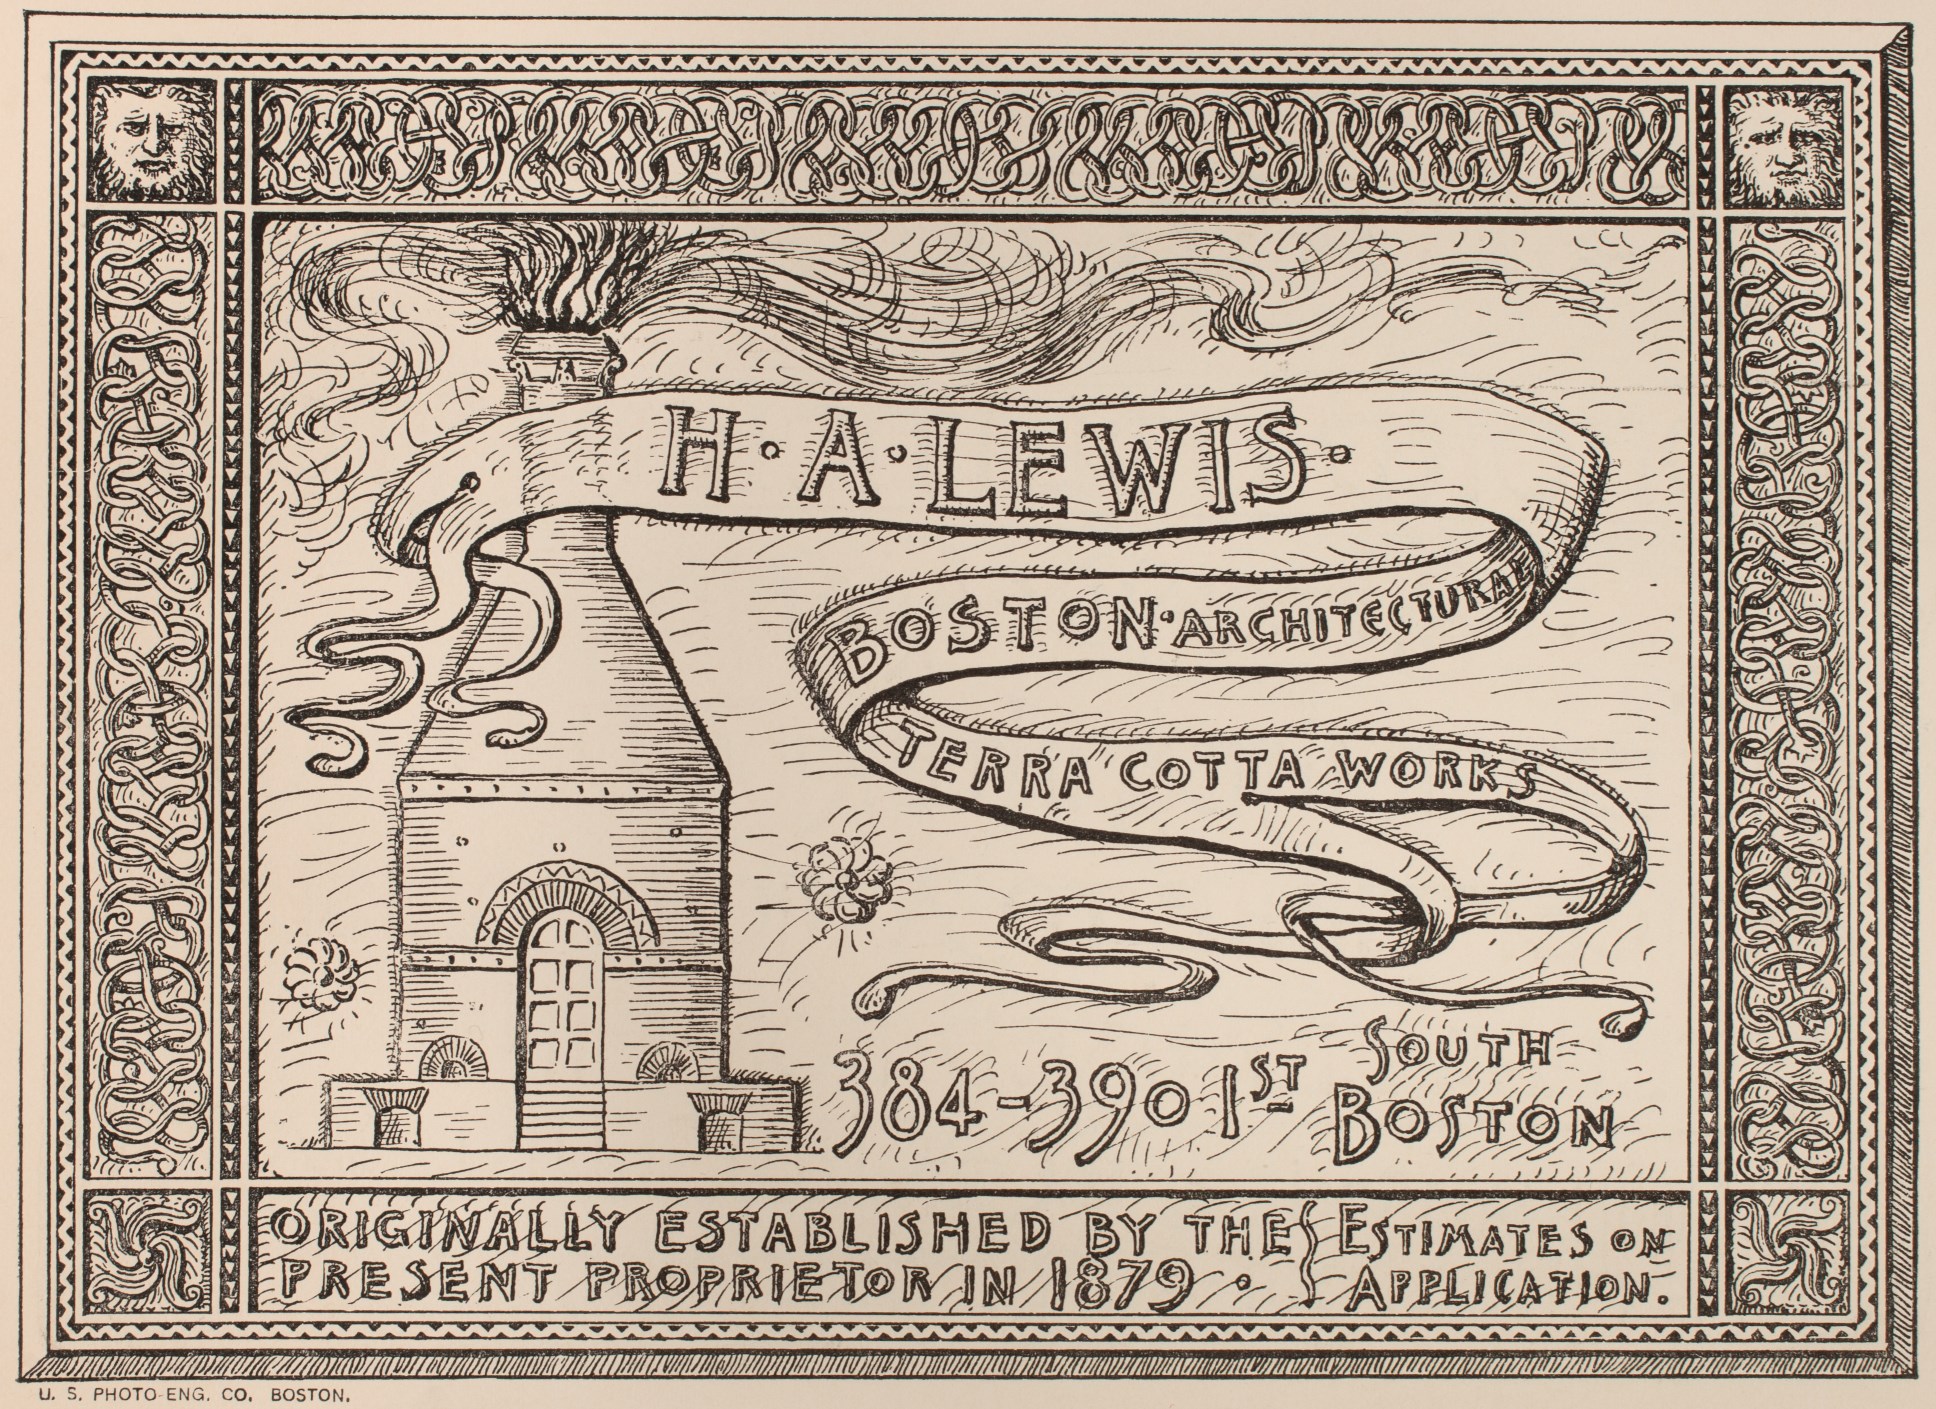 Black and white line drawing with decorative border and a kiln in the center with fire and smoke coming out of the chimney. There is a scrolling banner with the words H.A. Lewis Boston Architectural Terra Cotta Works. Text along bottom: 384-390 1st South Boston. Originally established by the present proprietor in 1879. Estimates on application.